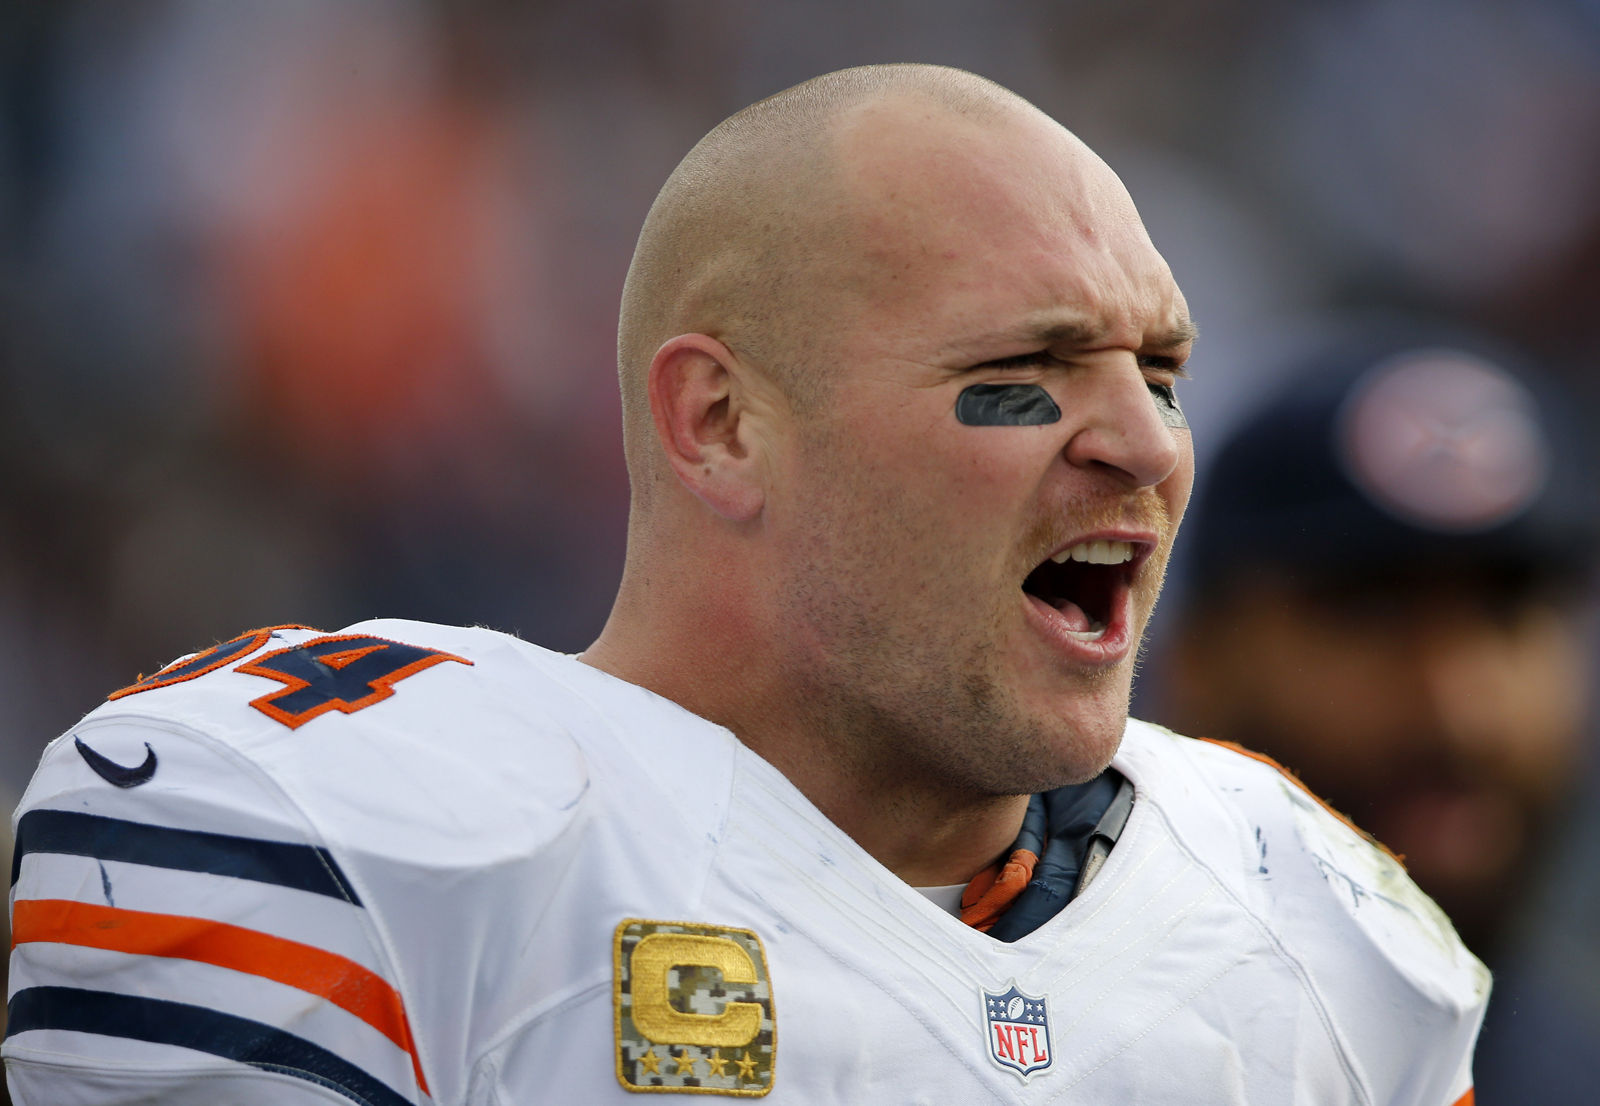 Lewis will be joined by fellow linebacker Brian Urlacher who made also made it on his first year on the ballot. File. (AP Photo/Joe Howell)